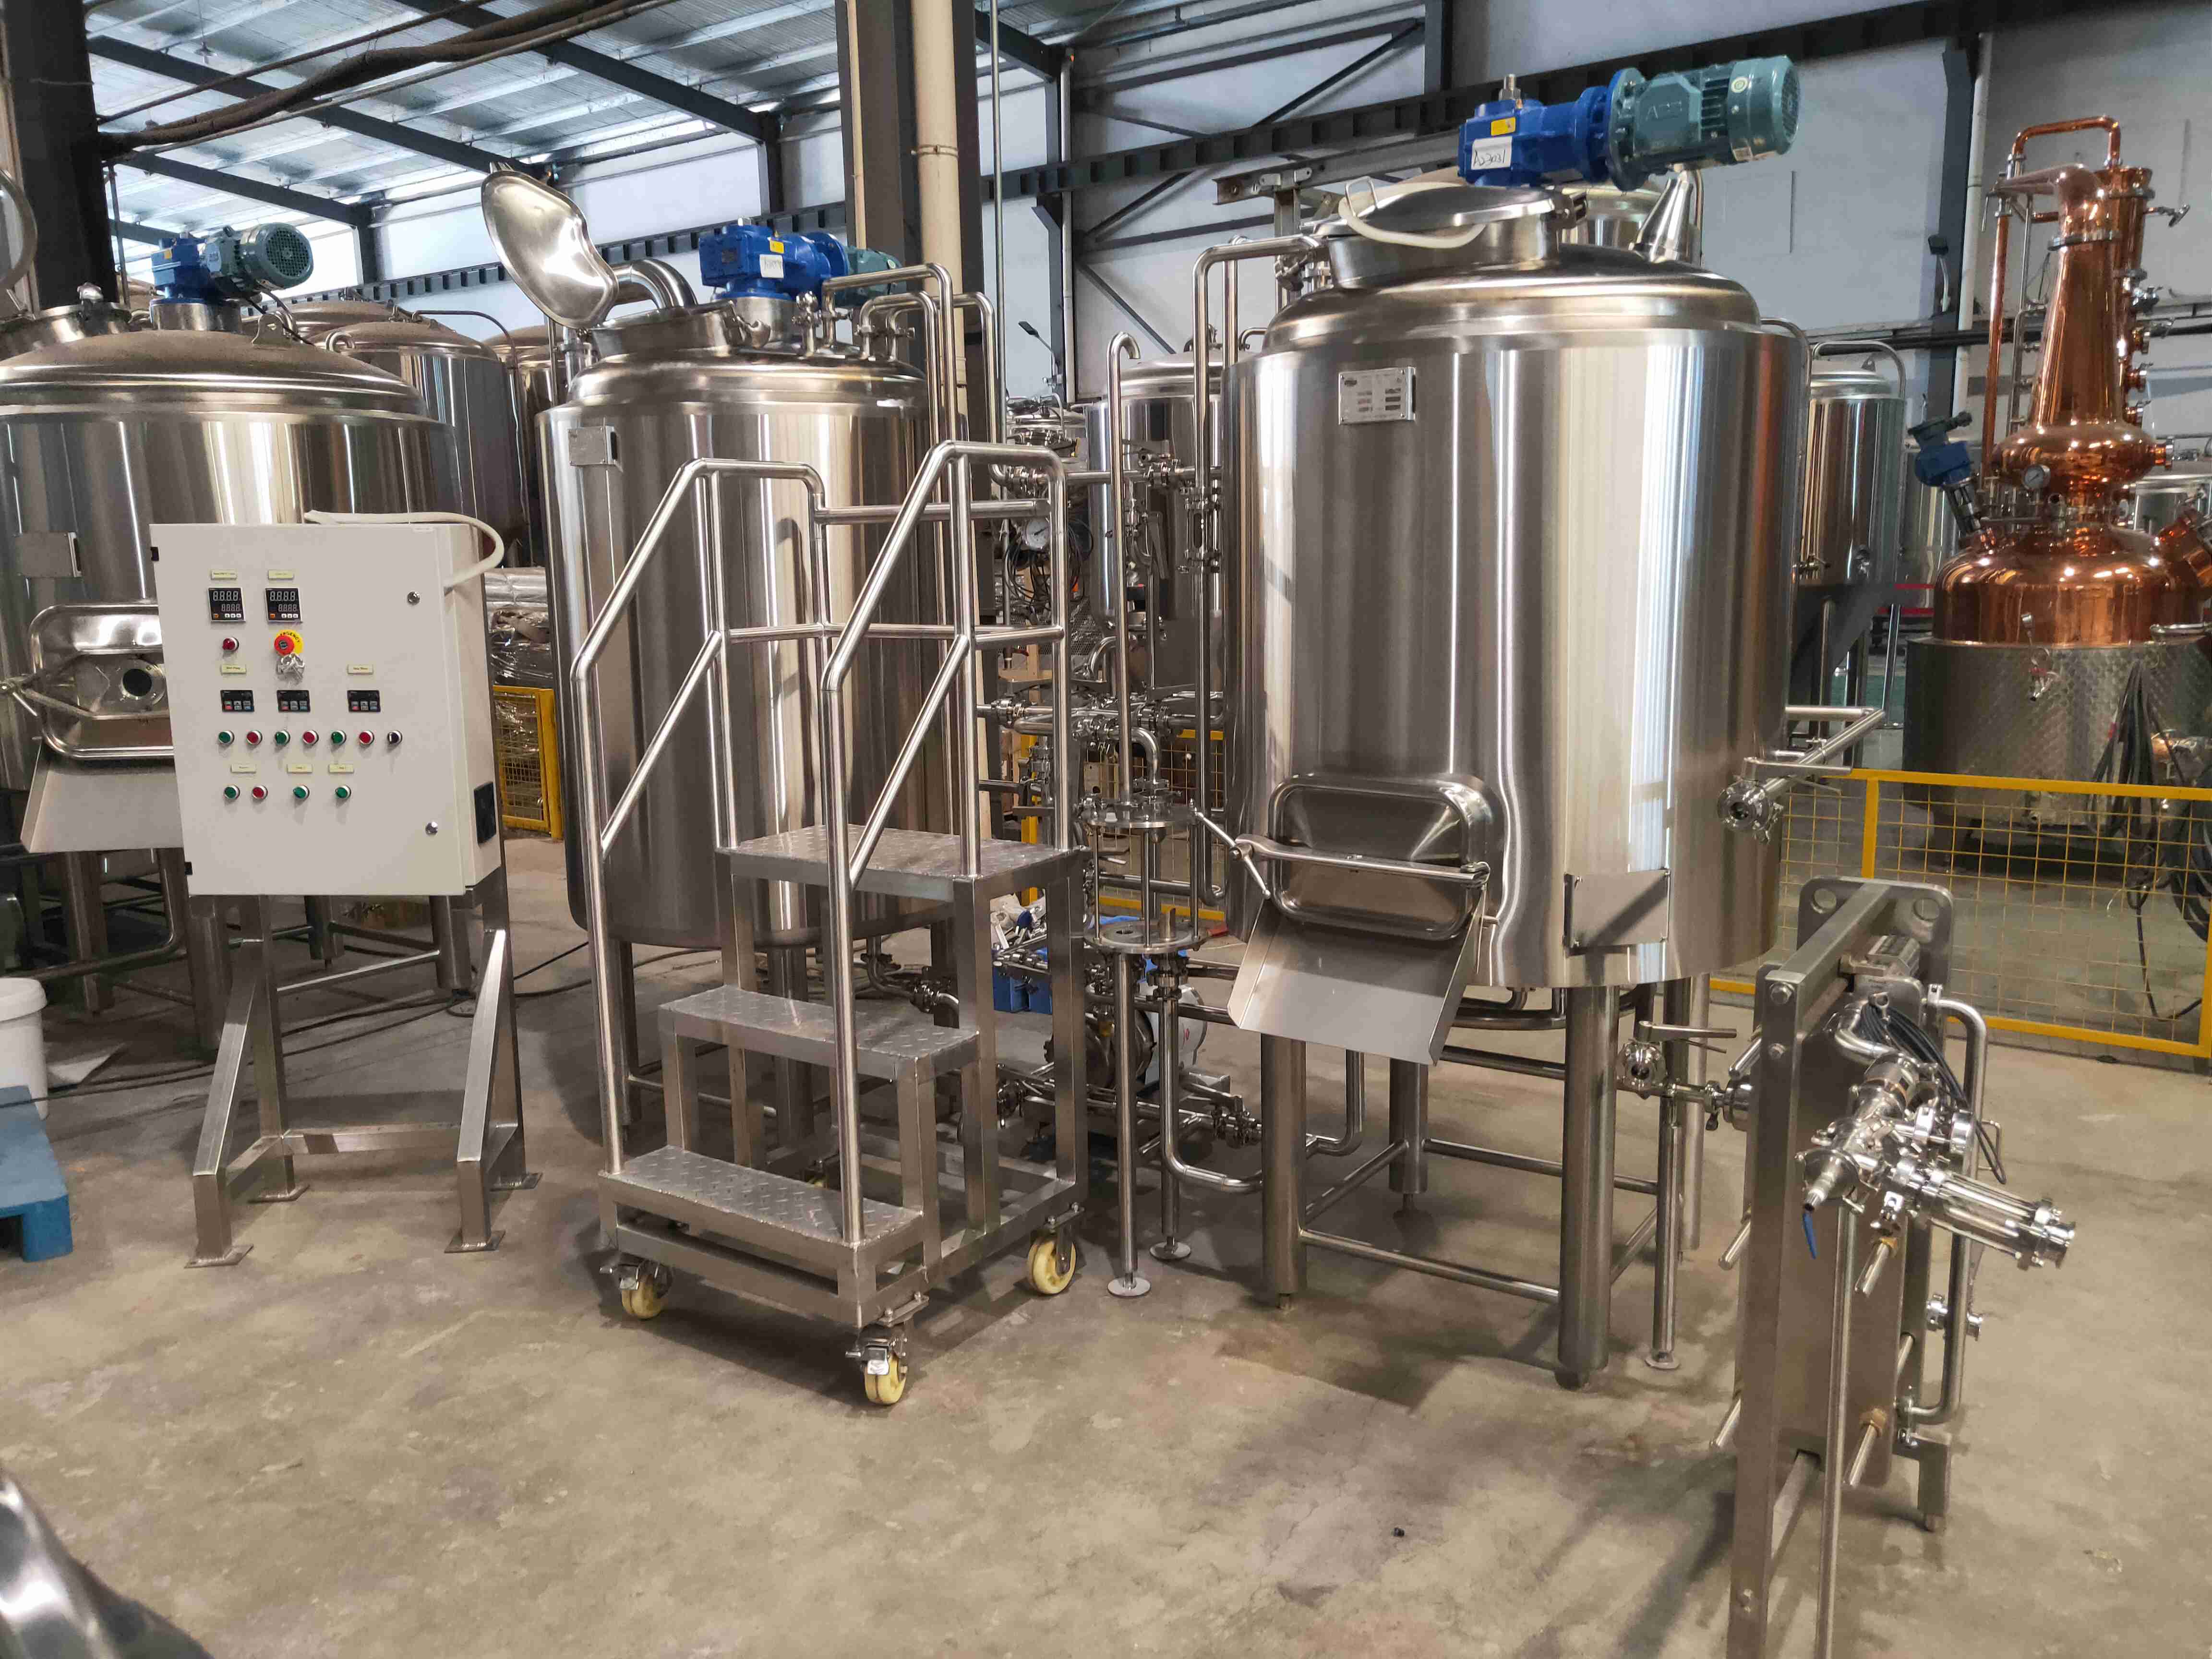 Tiantai 400L Brewery Project Set Up in Japan